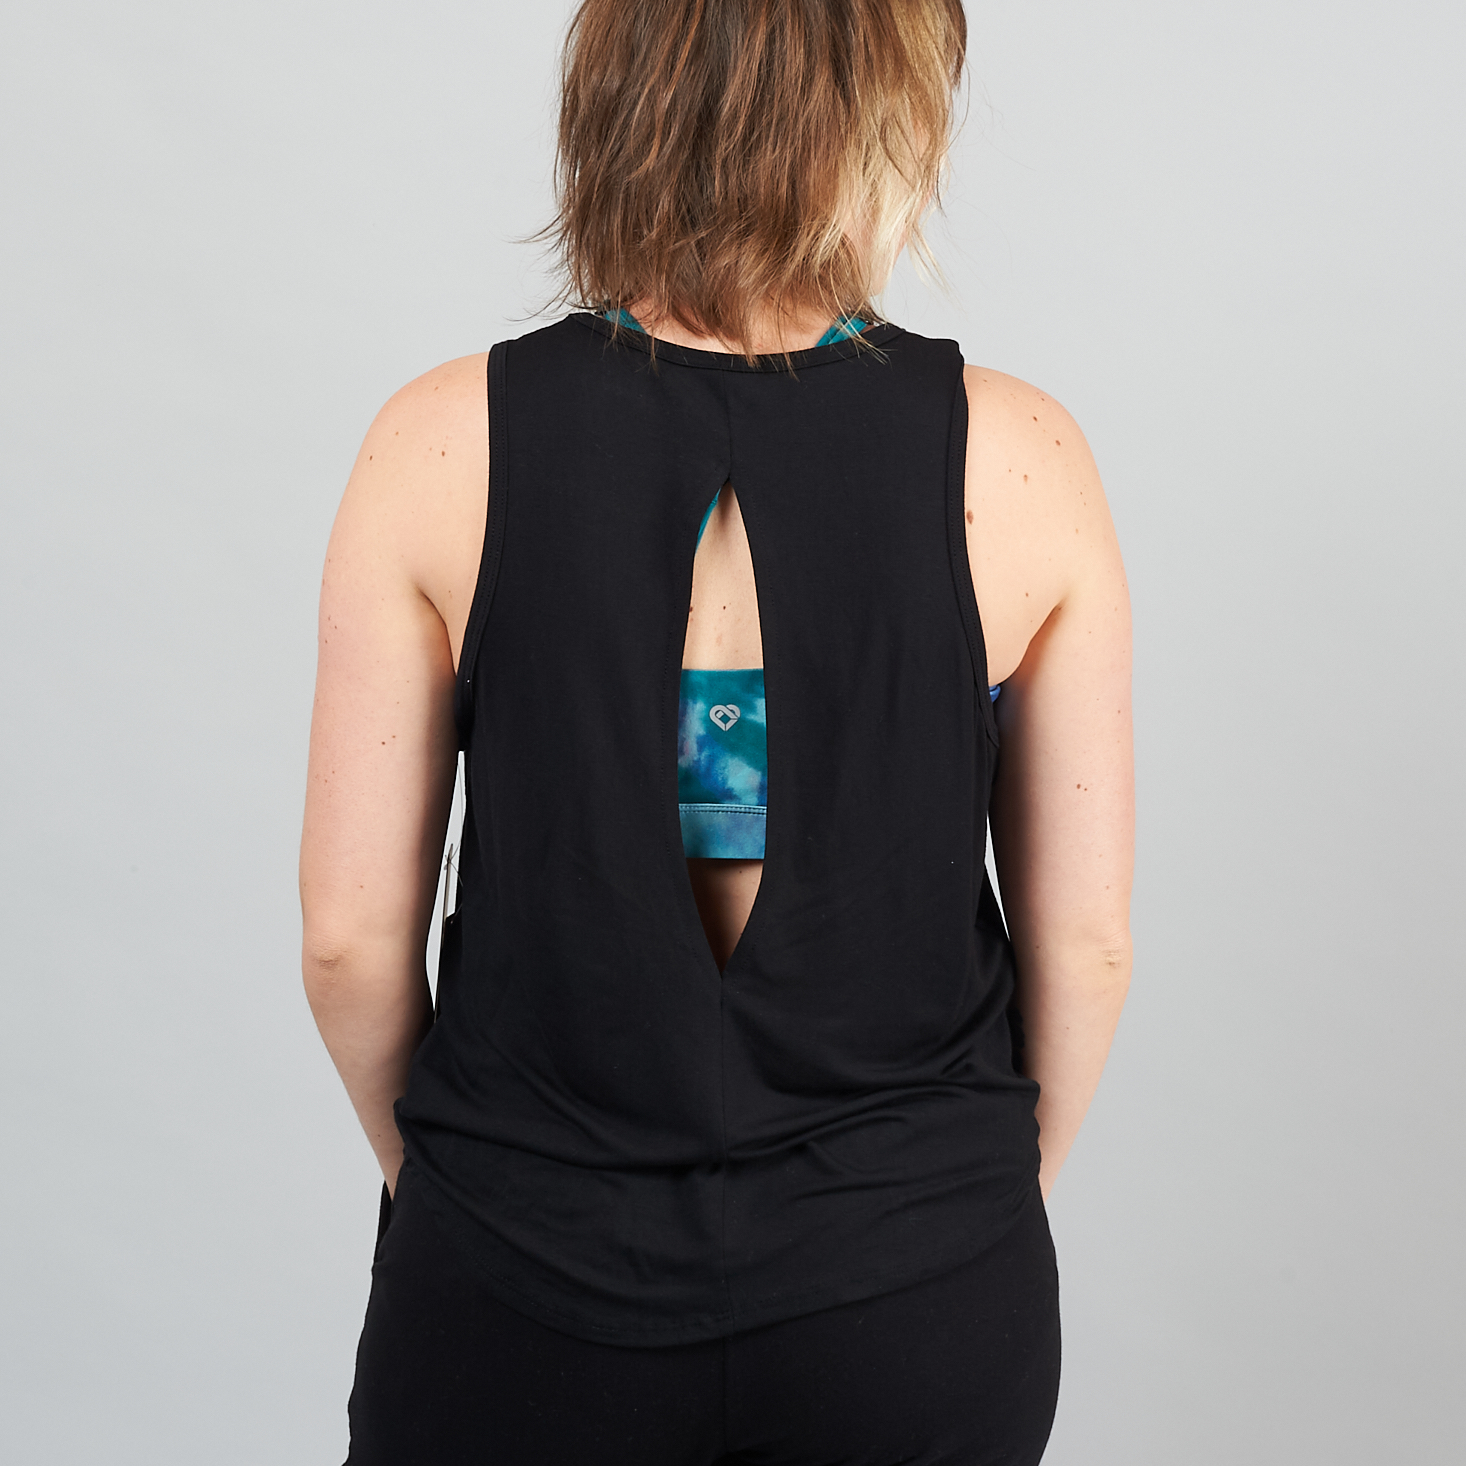 Wantable Fitness Edit February 2020 interval tank top with back keyhole